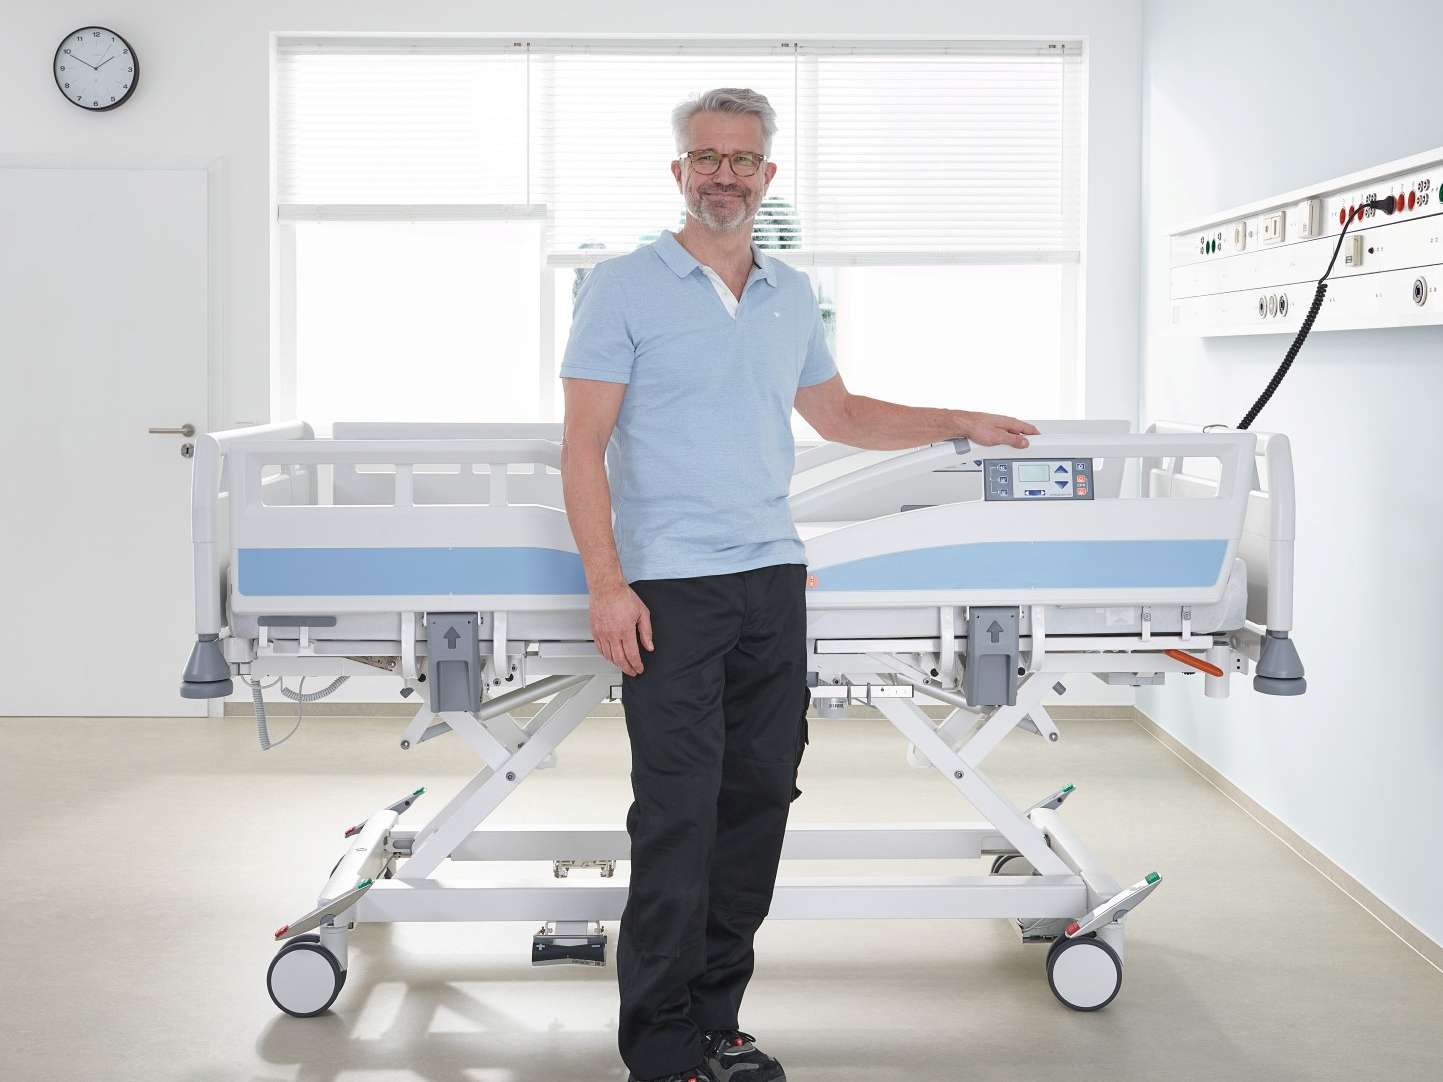 The Evario one hospital bed from Stiegelmeyer